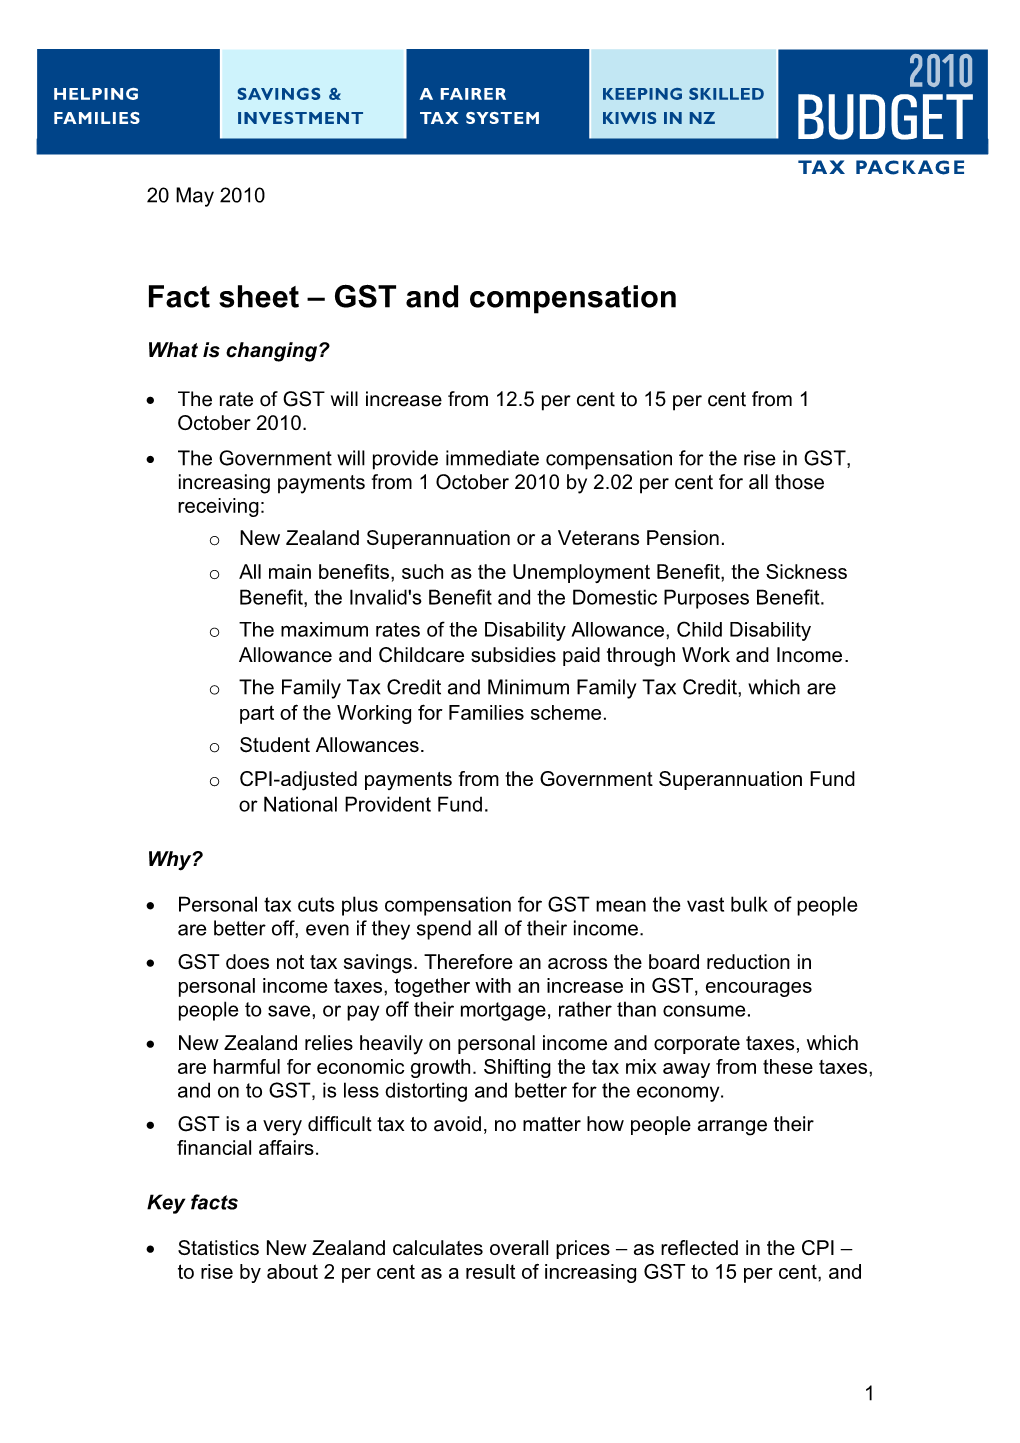 Fact Sheet - GST and Compensation